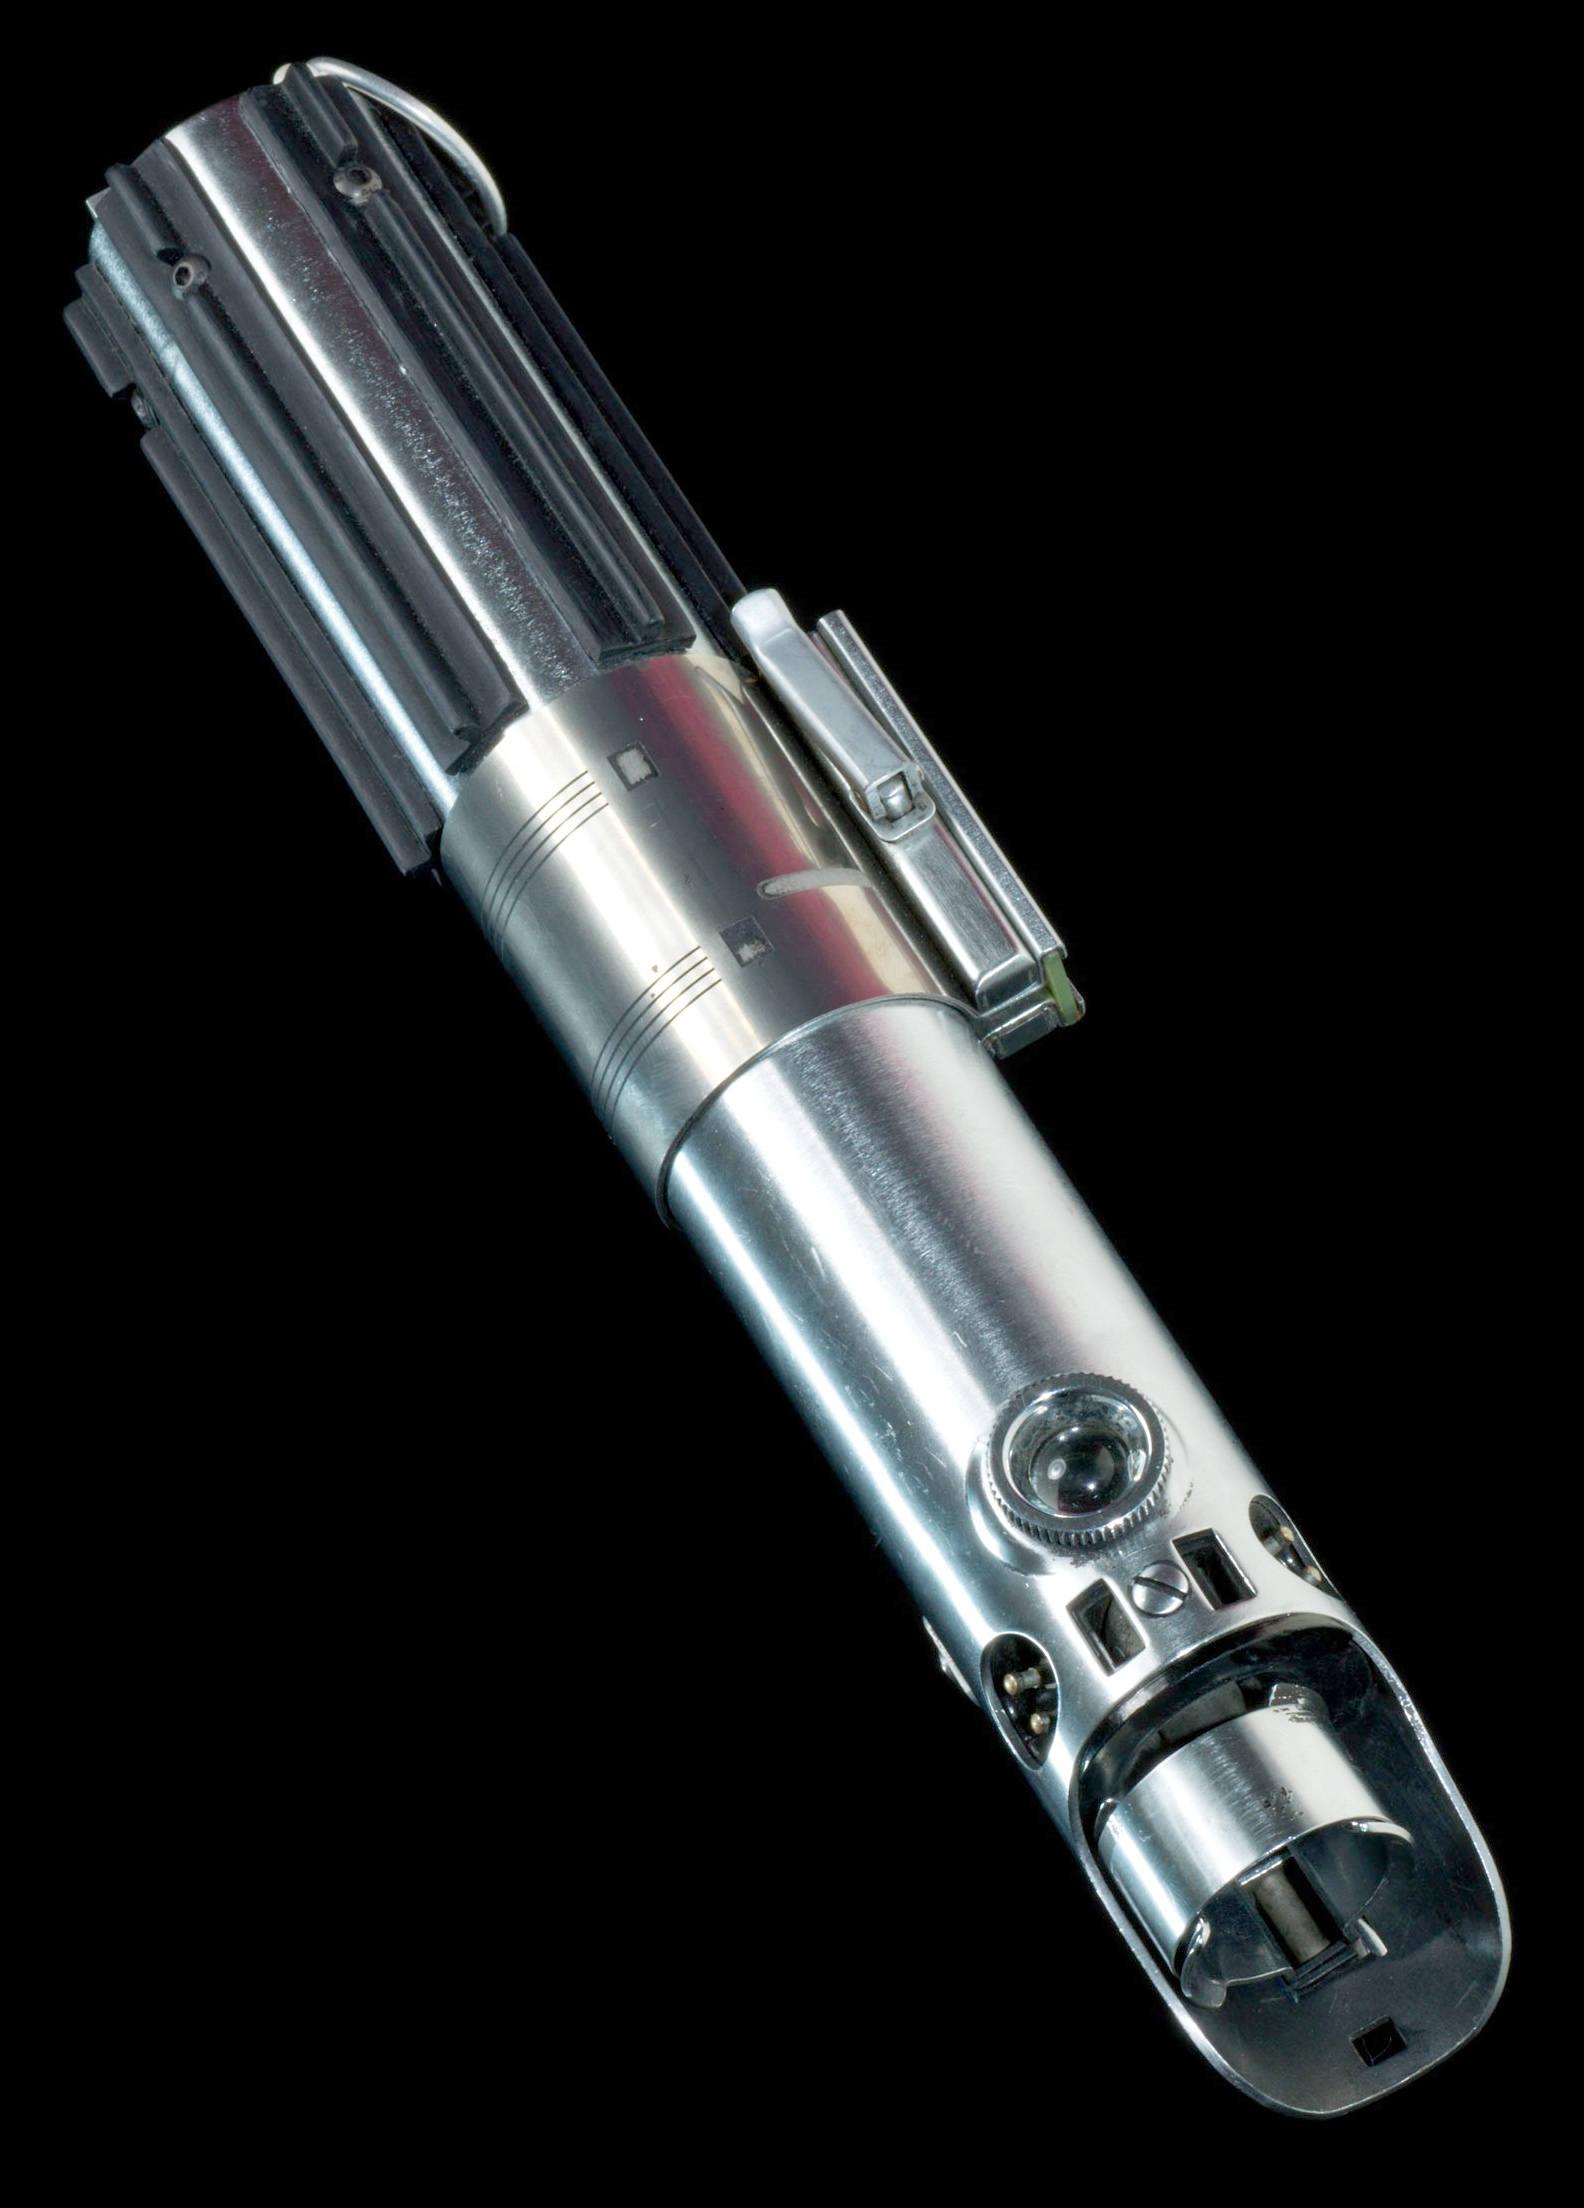 More HD photo of Rey's Lightsaber (and its true identity)